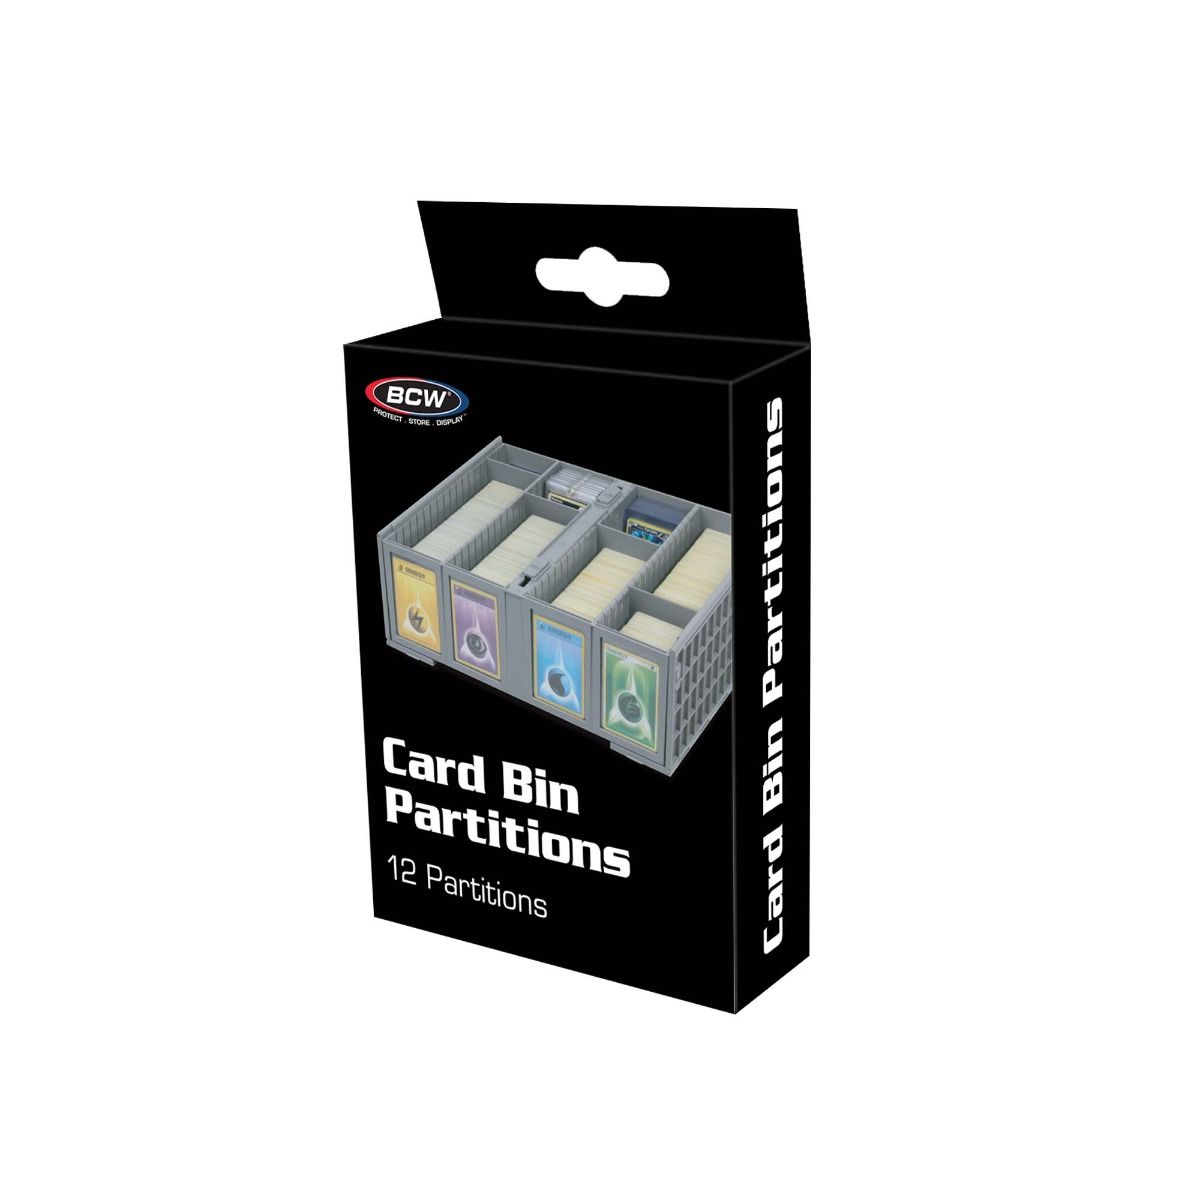 BCW Collectible Card Bin Partitions - Gray - Duel Kingdom